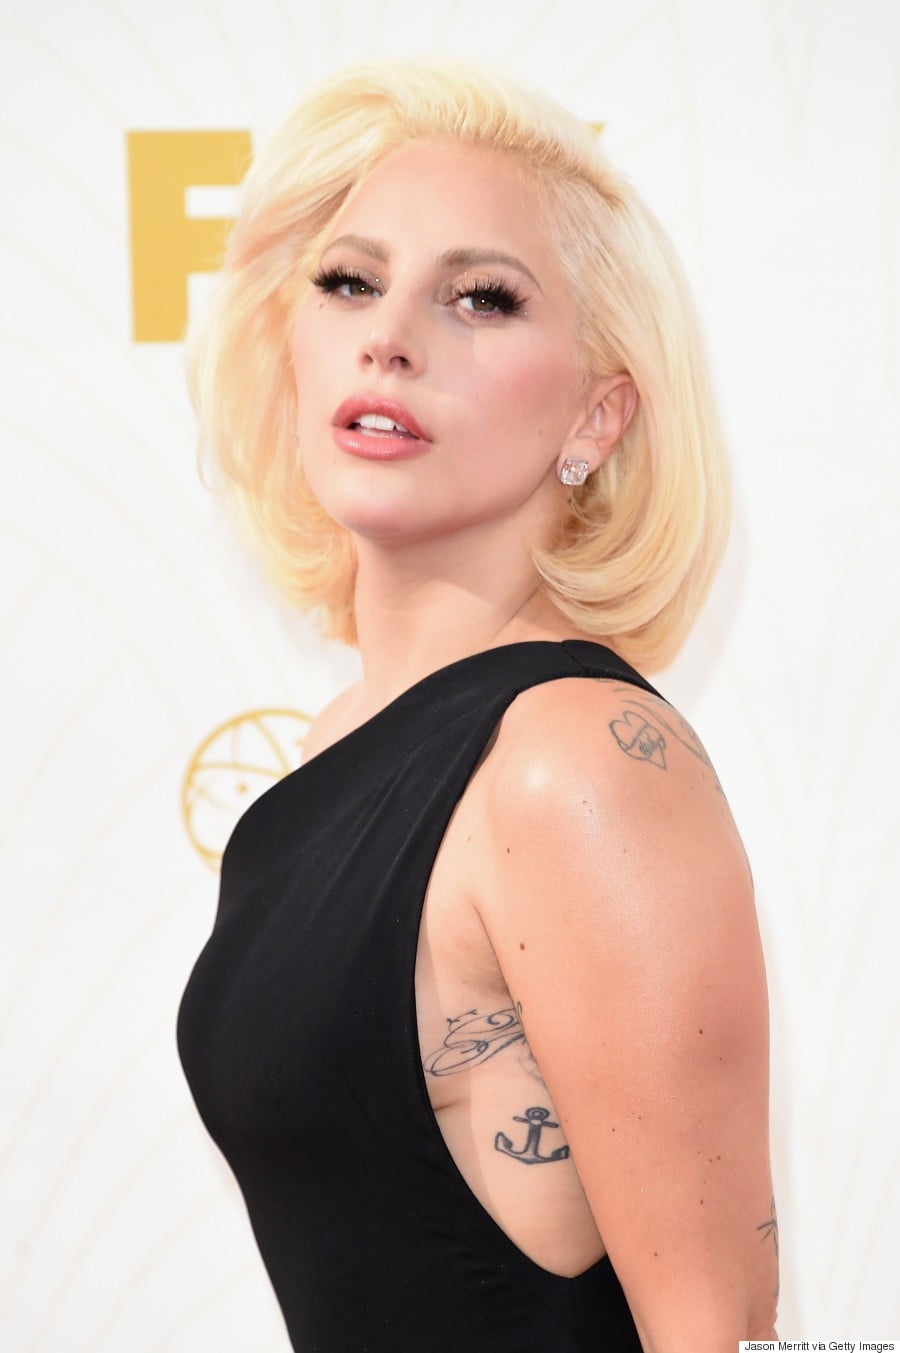 LOS ANGELES, CA - SEPTEMBER 20: Singer Lady Gaga attends the 67th Annual Primetime Emmy Awards at Microsoft Theater on September 20, 2015 in Los Angeles, California. (Photo by Jason Merritt/Getty Images)